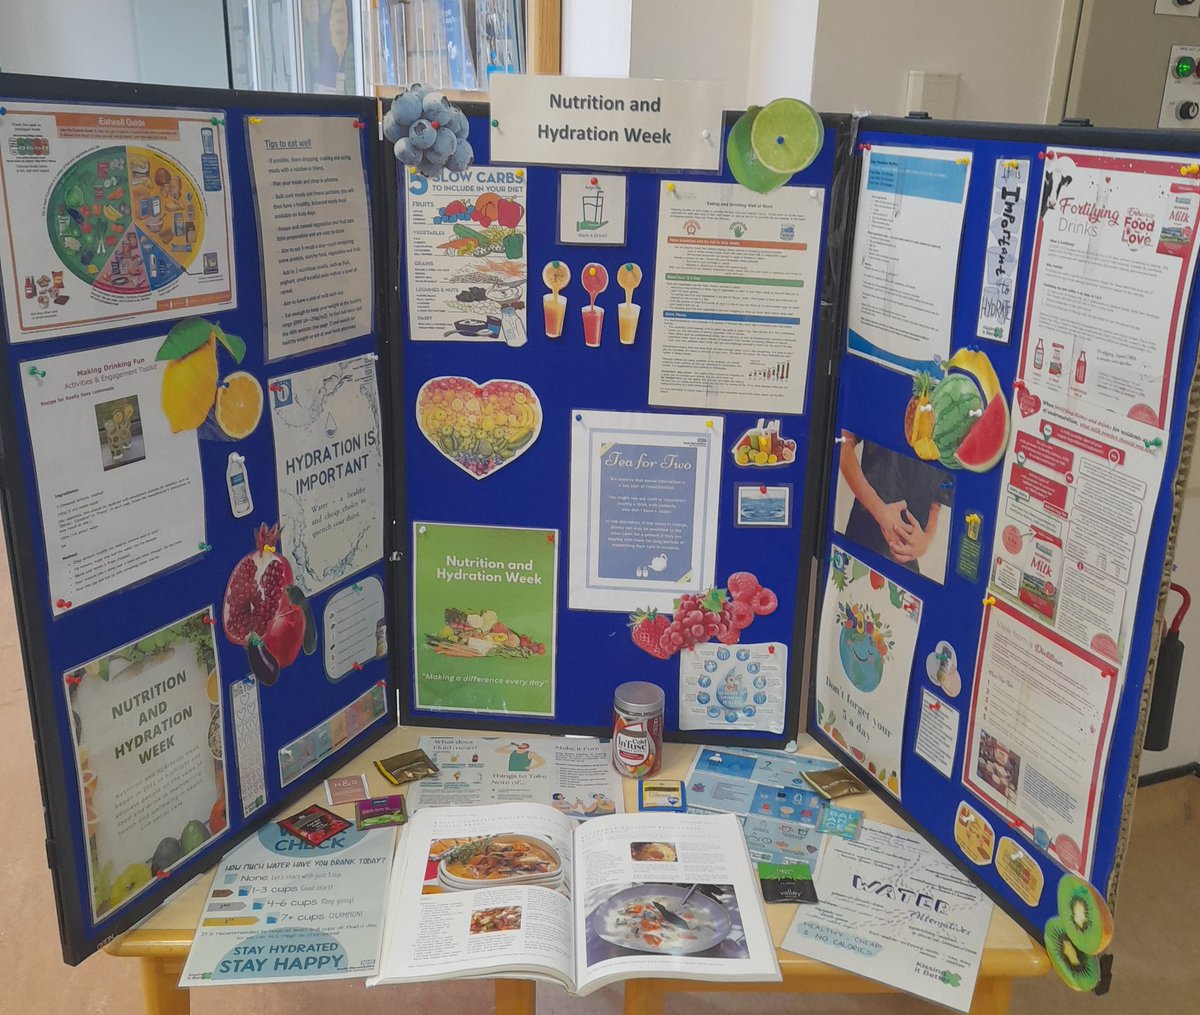 Our friends on Mary Ward have a fantastic & informative display promoting #nutritionandhydrationweek #education #TeamSWFT @ReconGamesUK